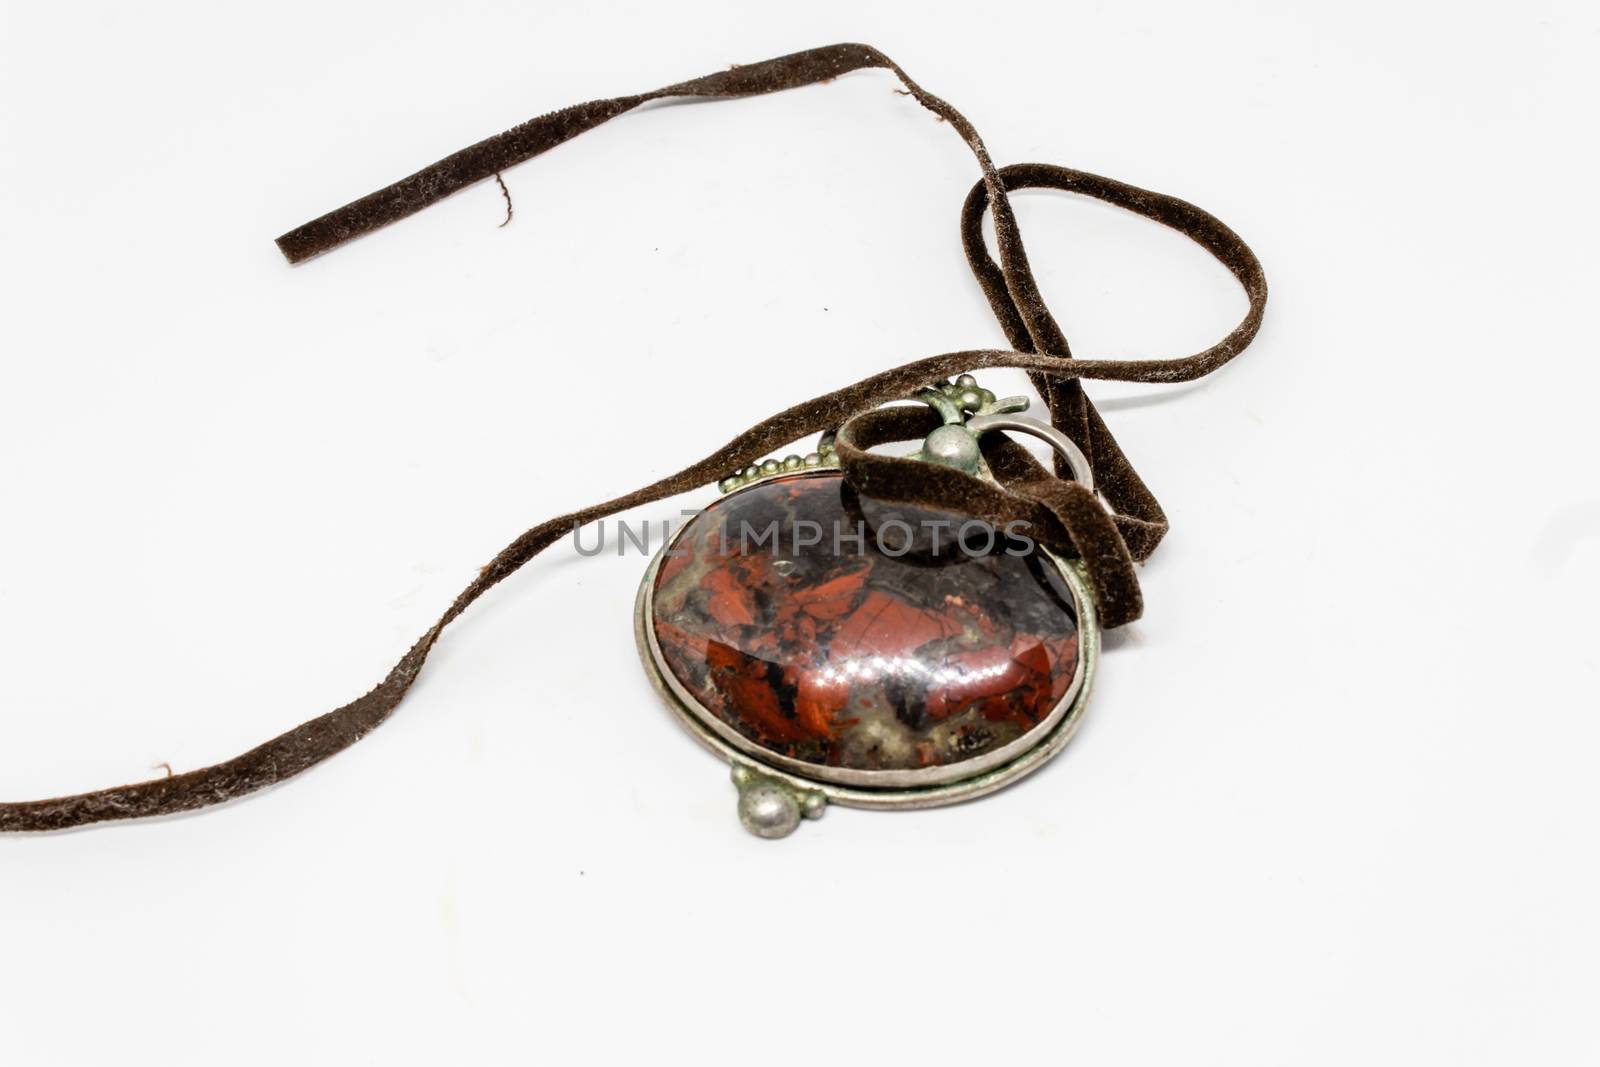 an isolated antique amulet closeup shoot with white background. With leather strap.